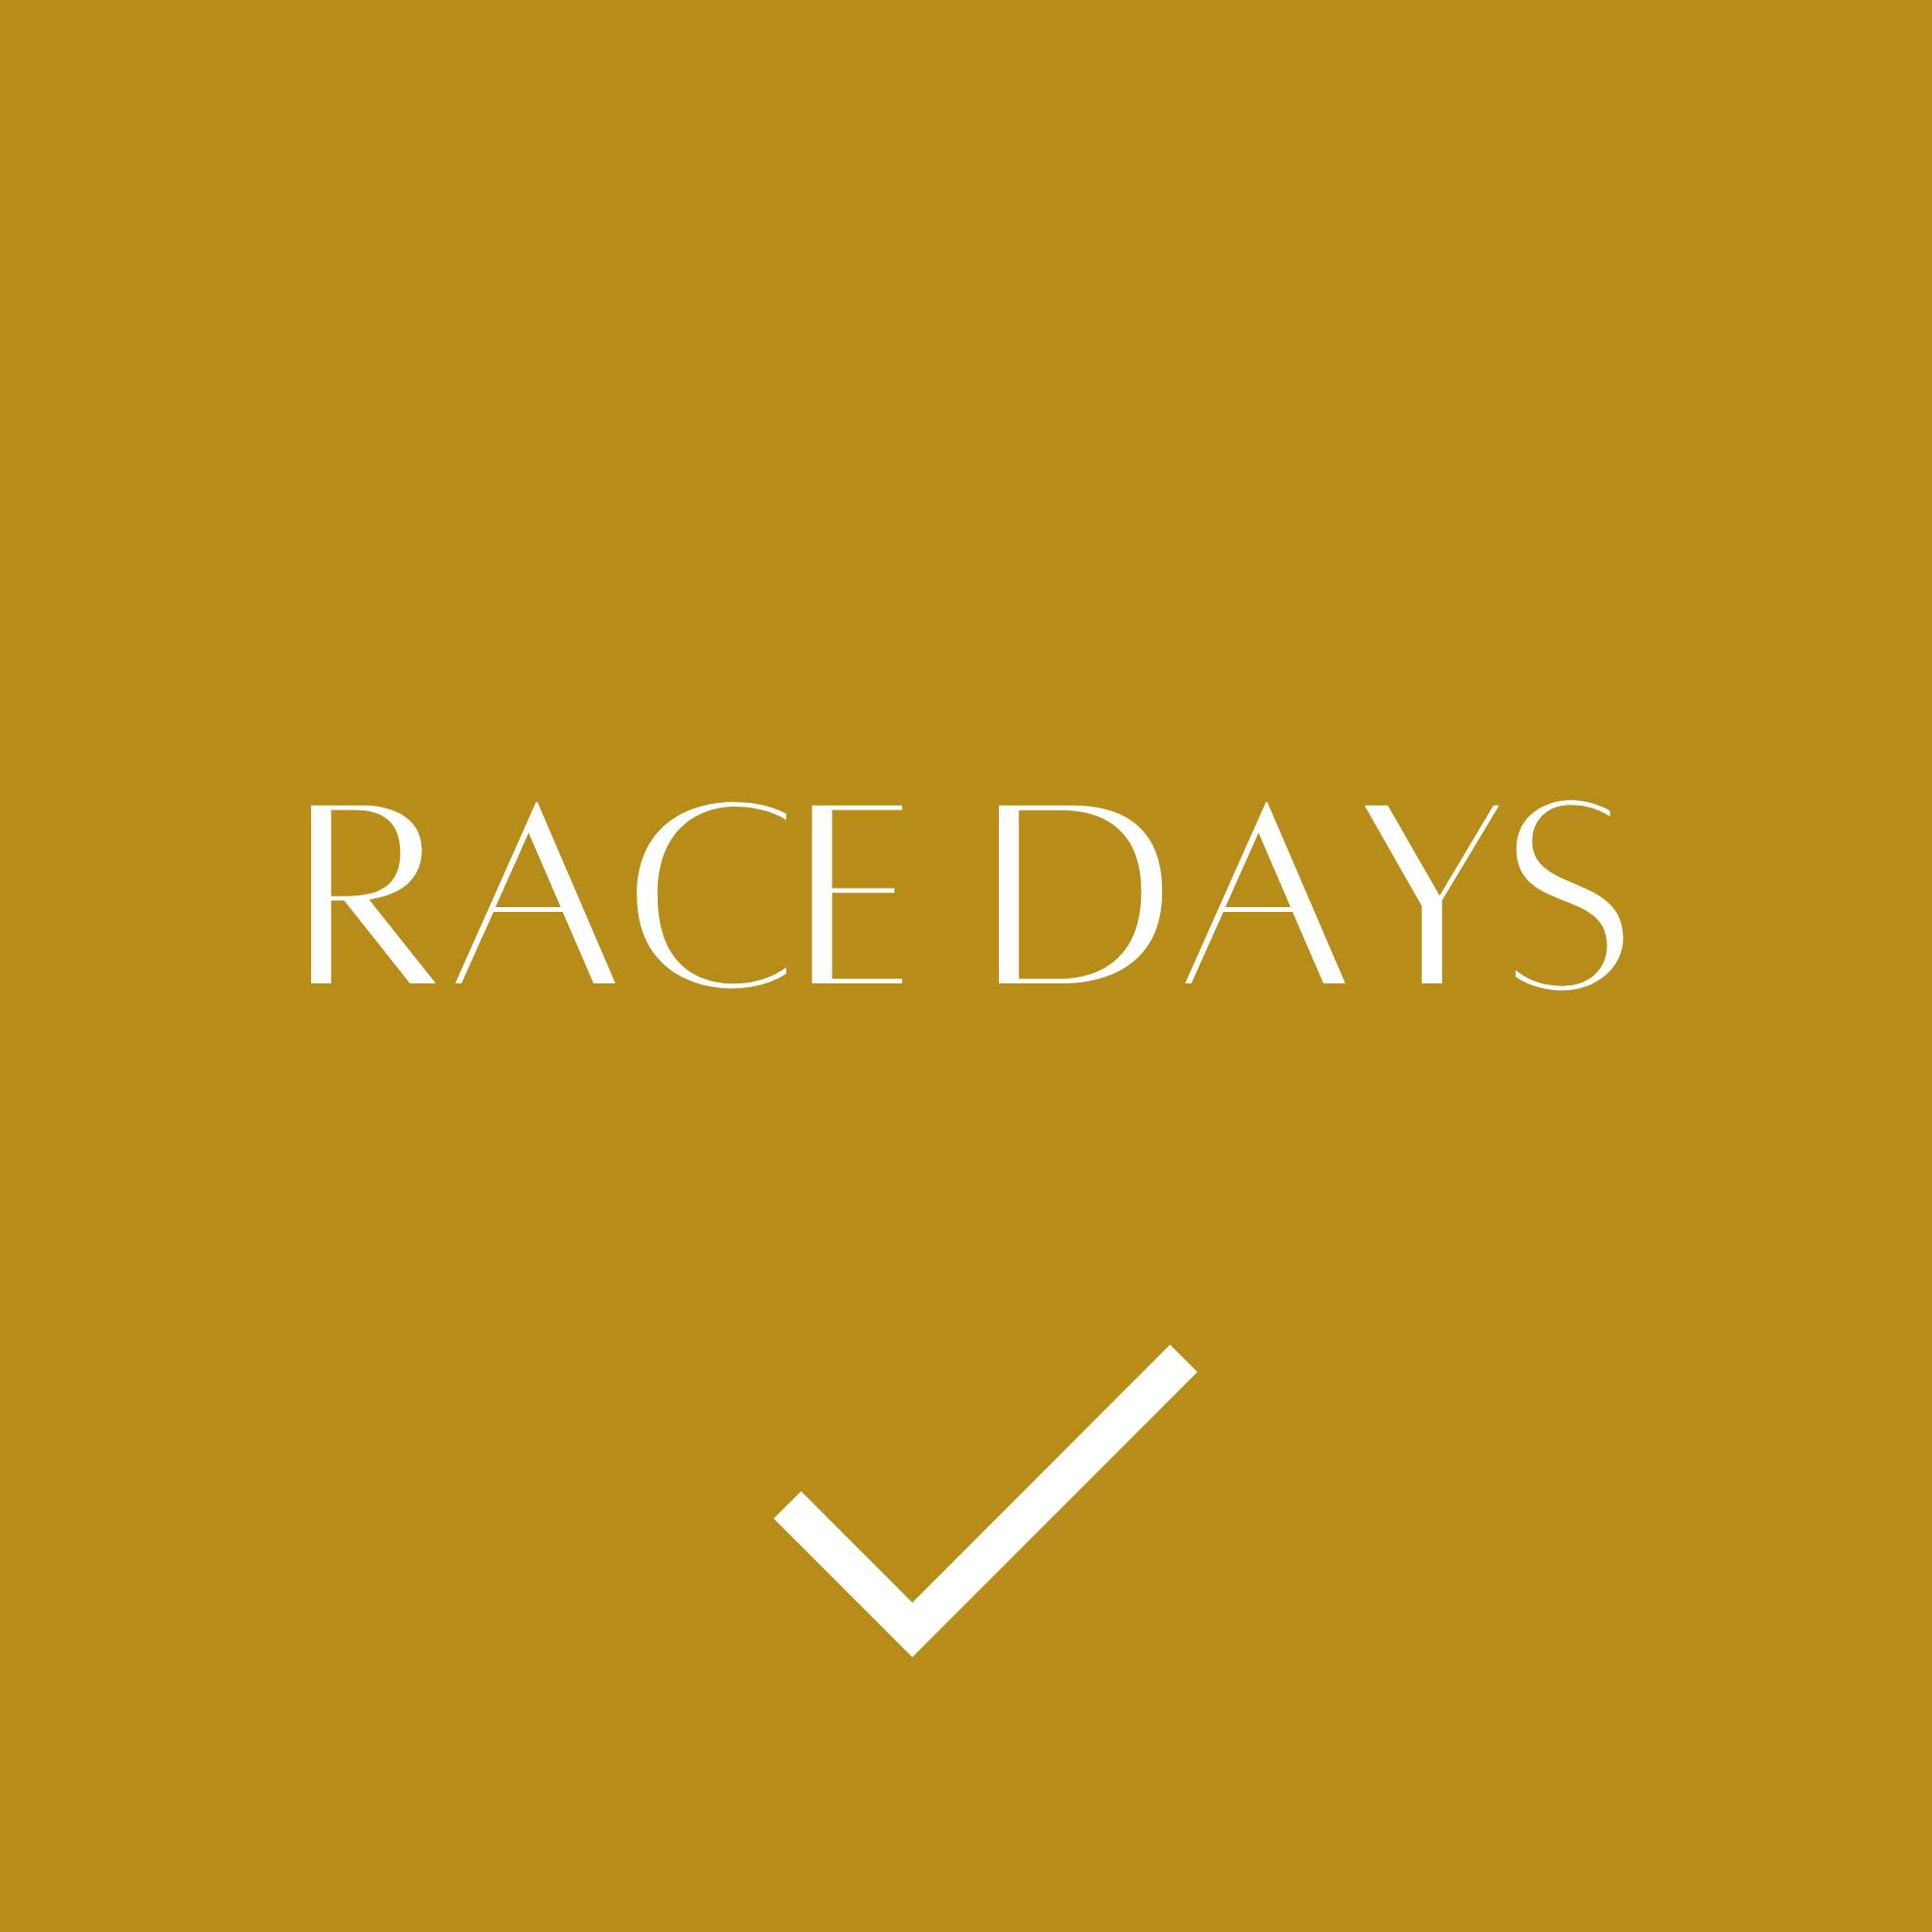 we offer prosecco for race days